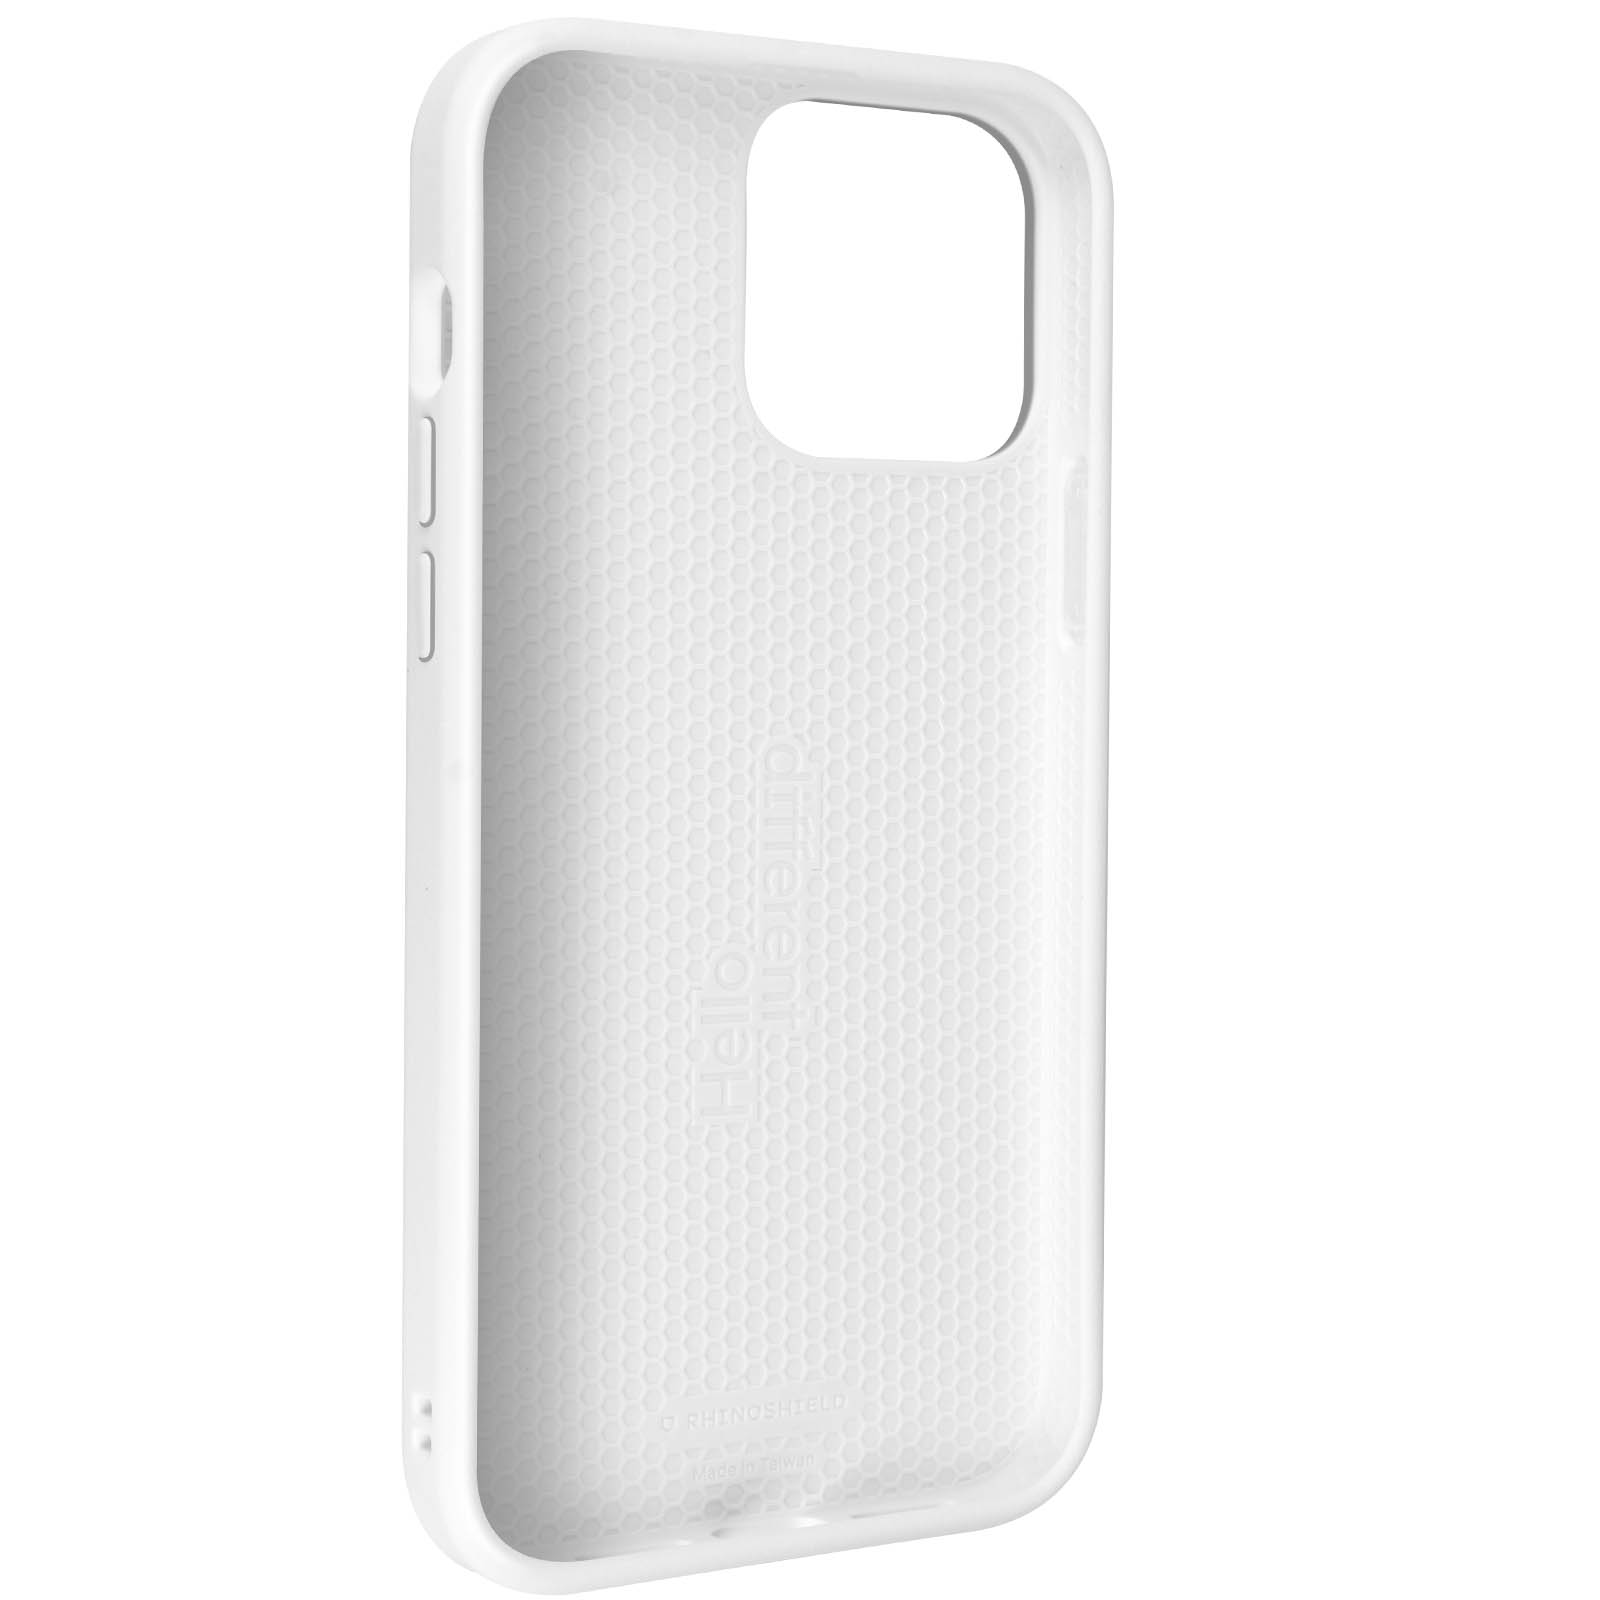 Max, 13 Backcover, SolidSuit Pro Series, iPhone Weiß Apple, RHINOSHIELD